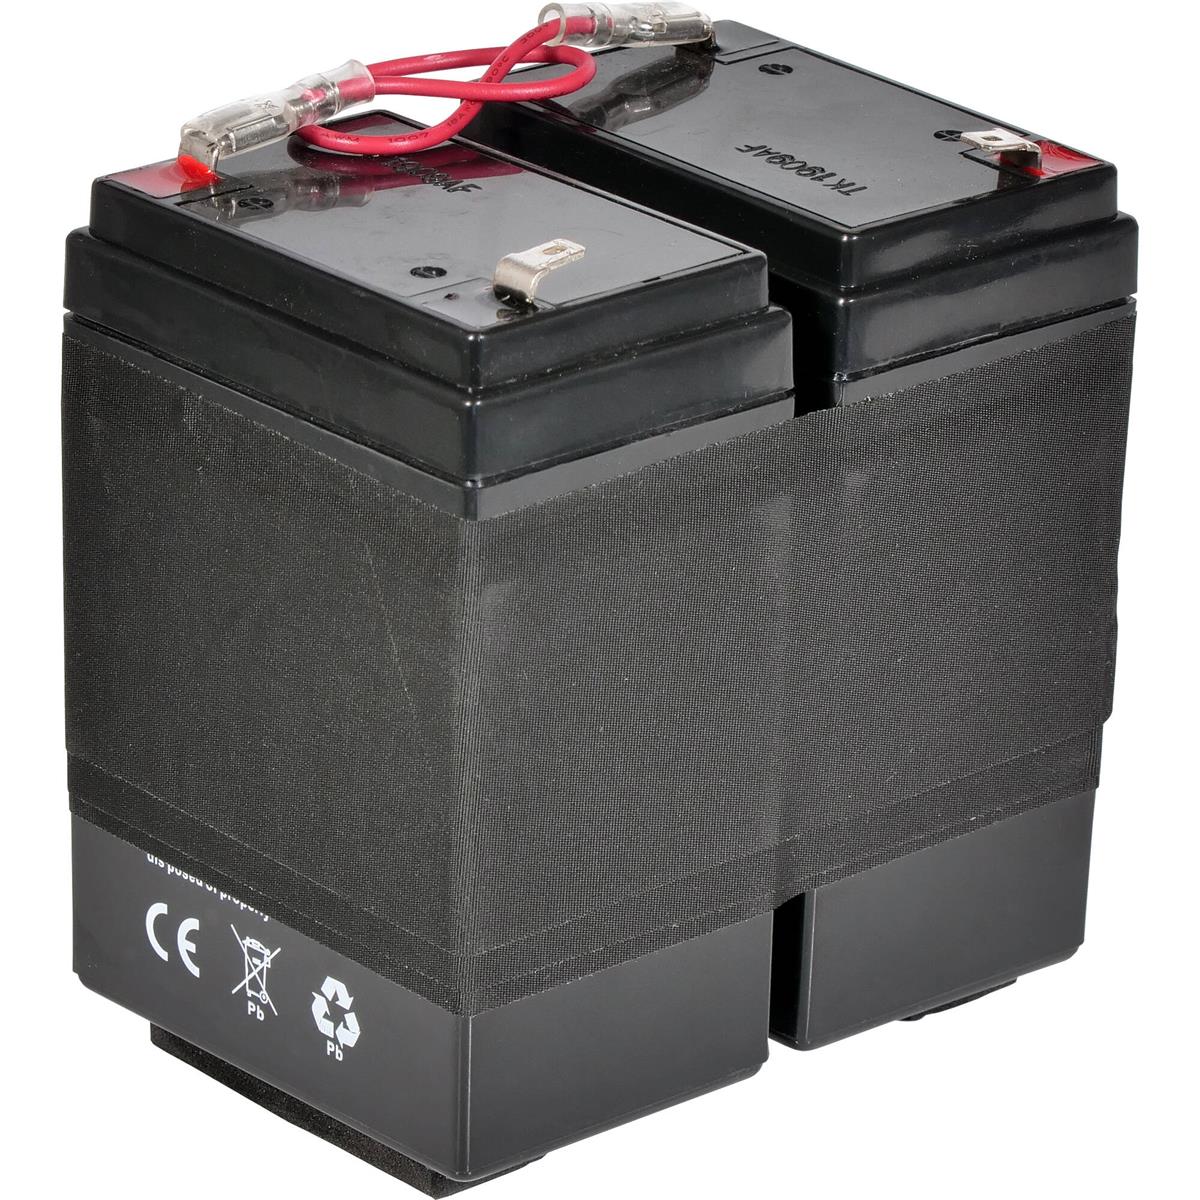 Image of Galaxy Audio Rechargable Battery for TQ8 Wireless Speaker Systems